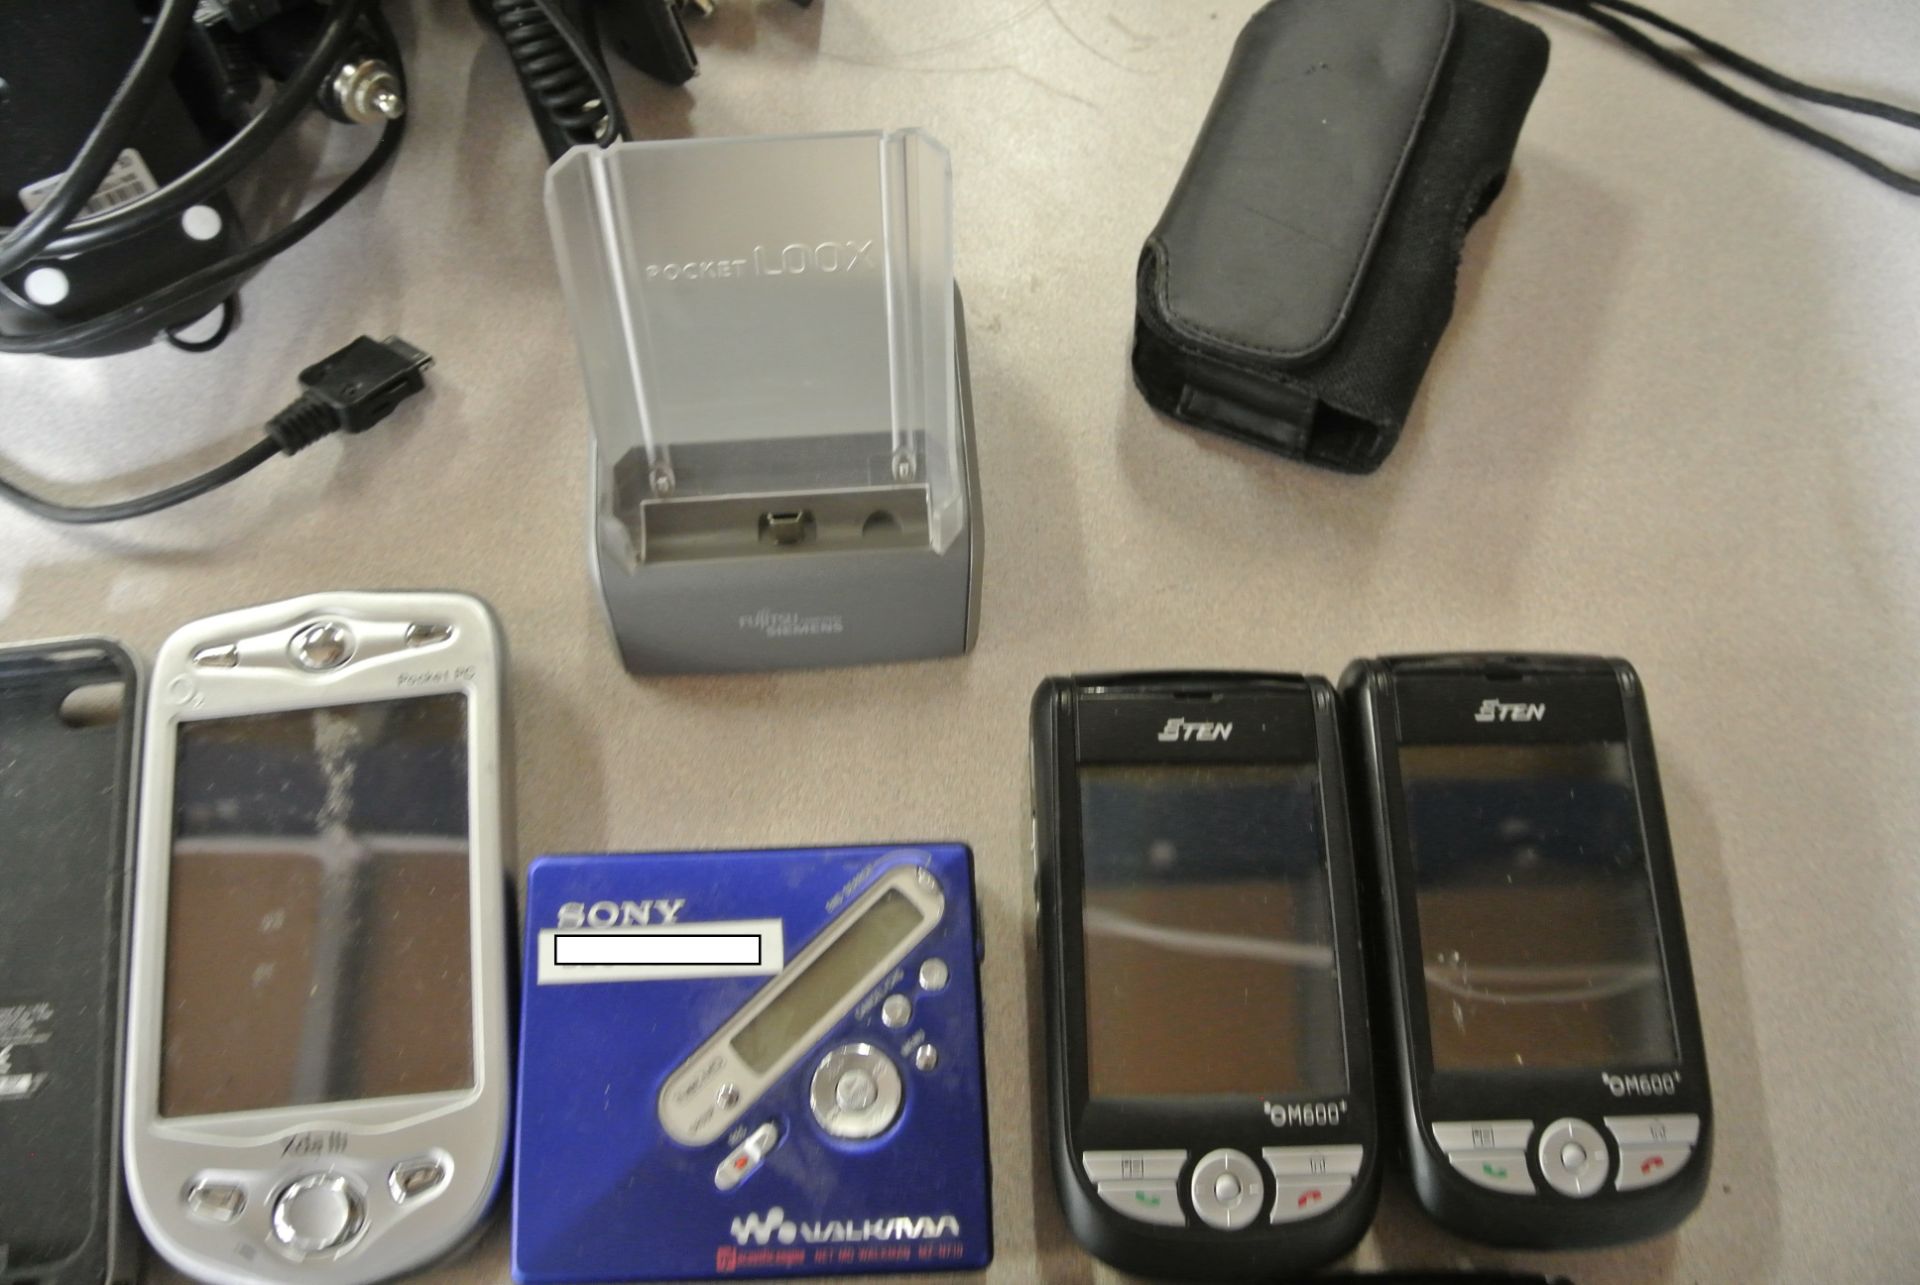 Large lot of multiple mobile phones and accessories, including - 1 x ETEN Pocket PC + 5 x ETEN OM600 - Image 4 of 7